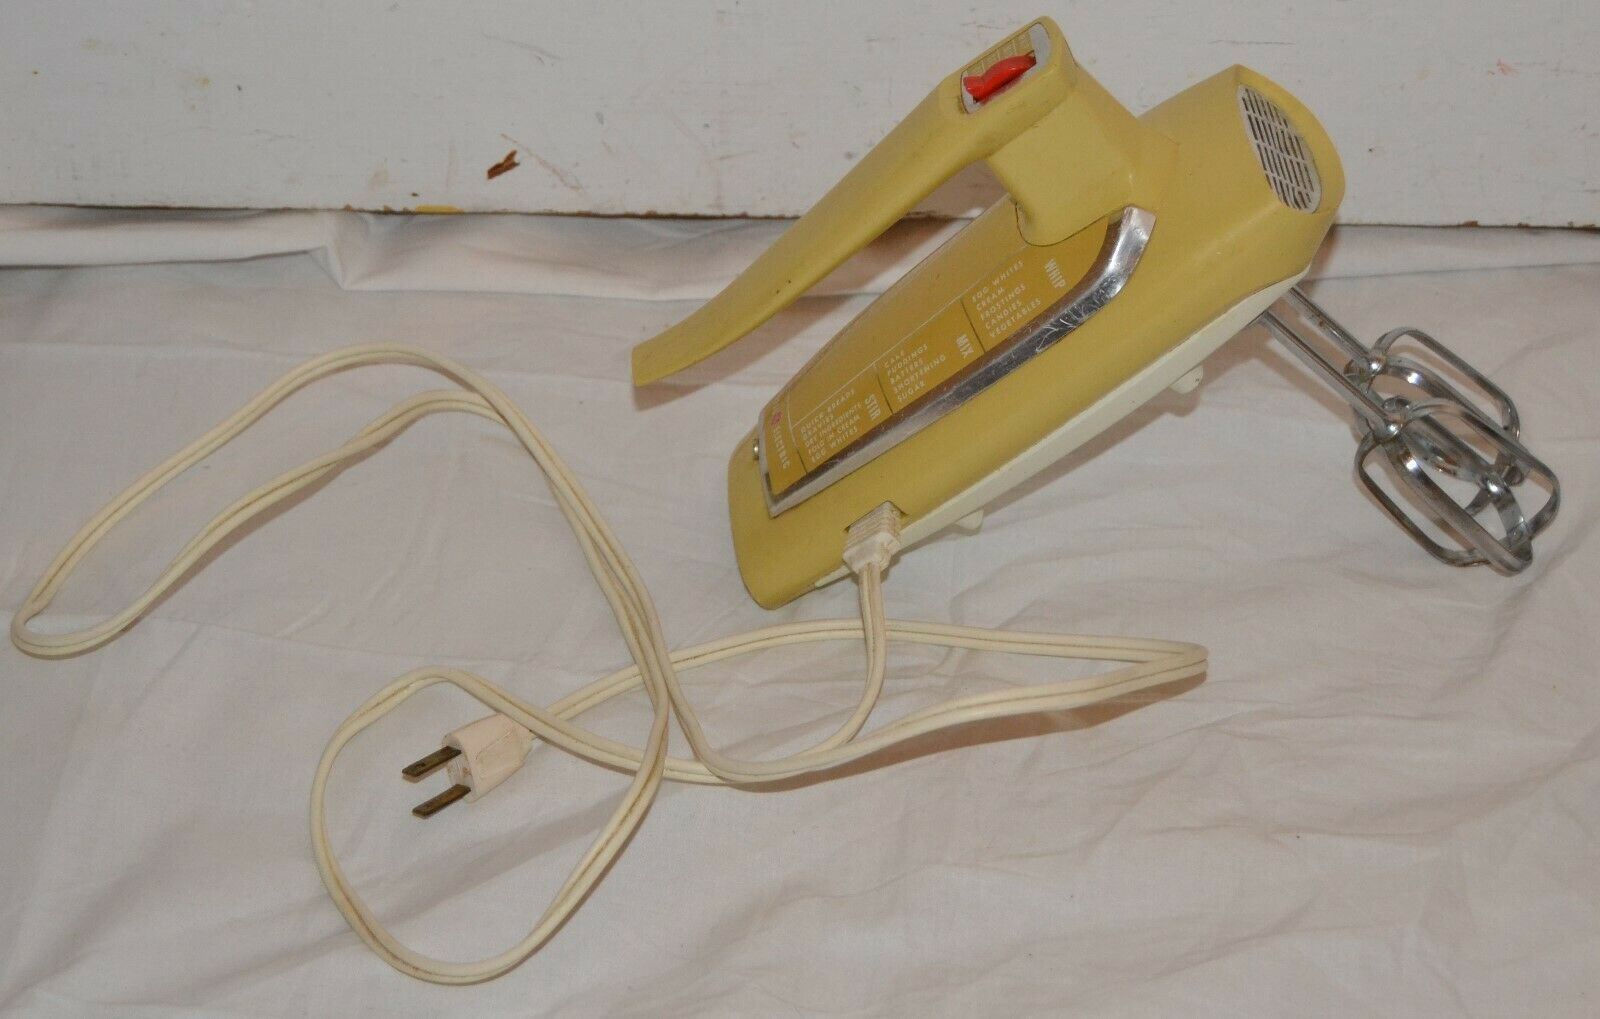 Vintage General Electric Hand Mixer 3 Speed Cat No D3M47 Made USA - $37.39